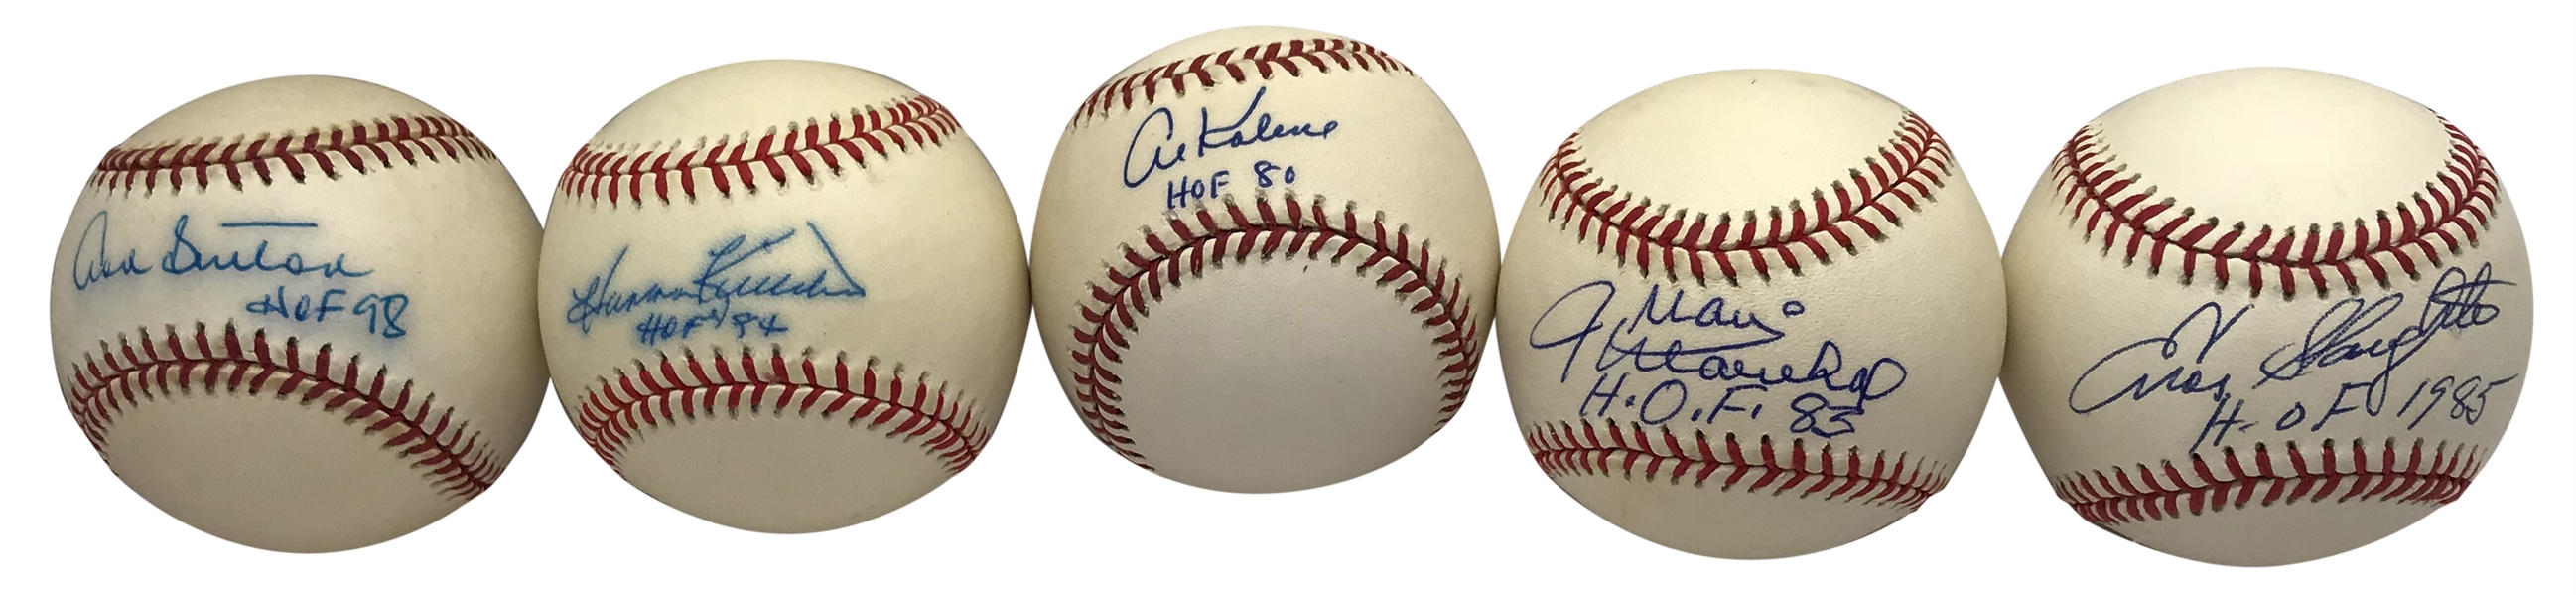 Lot of Ten (10) Signed & Hall of Fame Inscribed Baseballs w/ Stargell, Brock, Killebrew & Others! (Beckett/BAS Guaranteed)